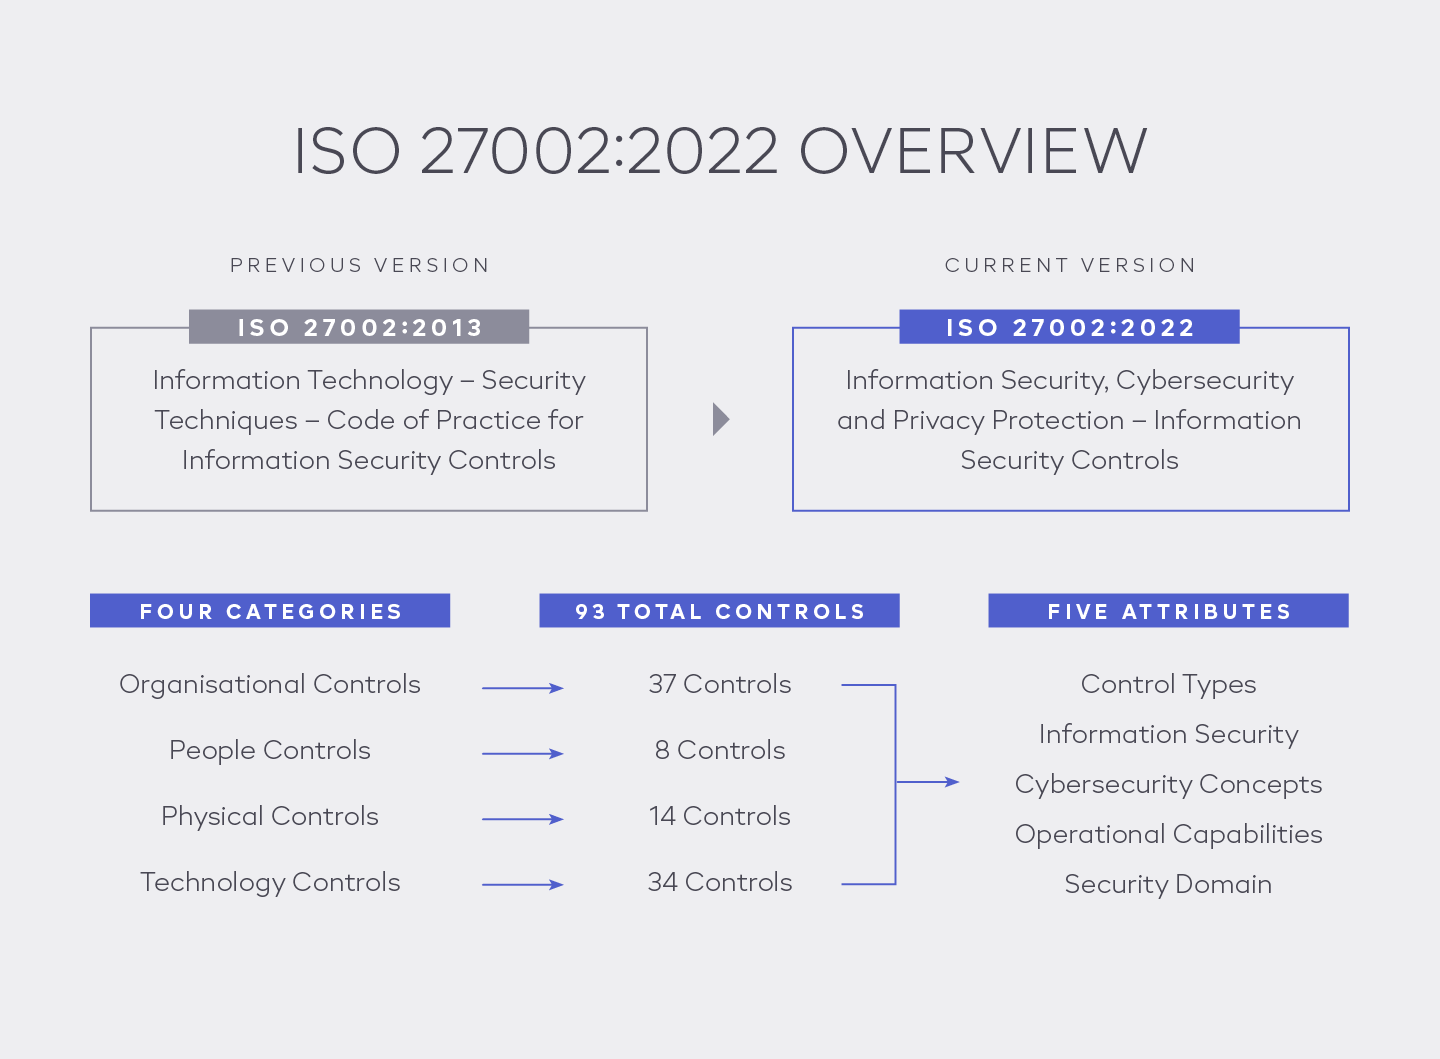 ISO 27002:2022 Overview